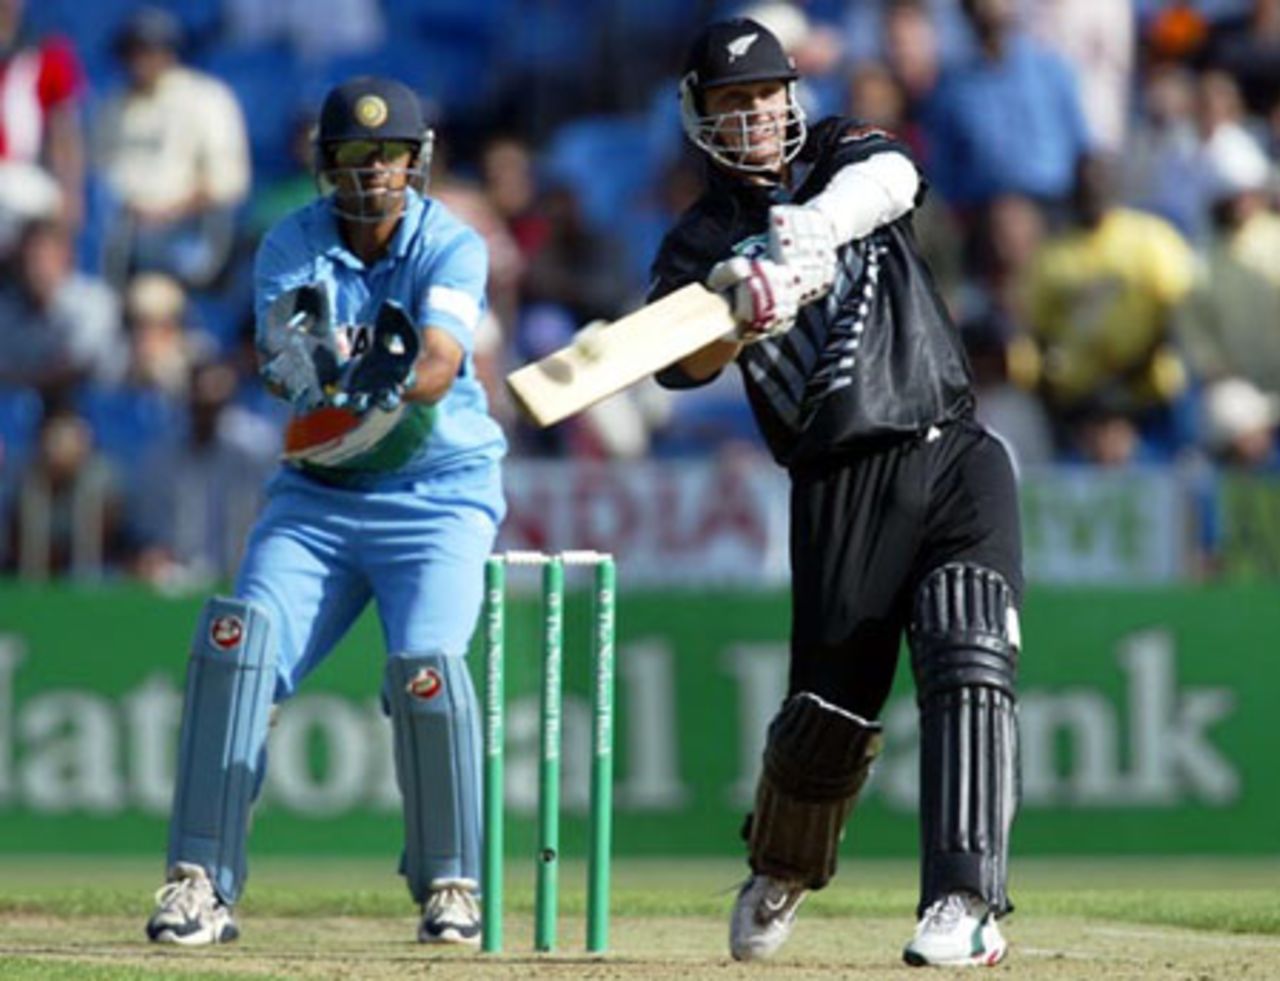 New Zealand batsman Shane Bond hits a delivery from Indian bowler Sourav Ganguly for six during his innings of 31 not out as wicket-keeper Rahul Dravid looks on. 6th ODI: New Zealand v India at Eden Park, Auckland, 11 January 2003.